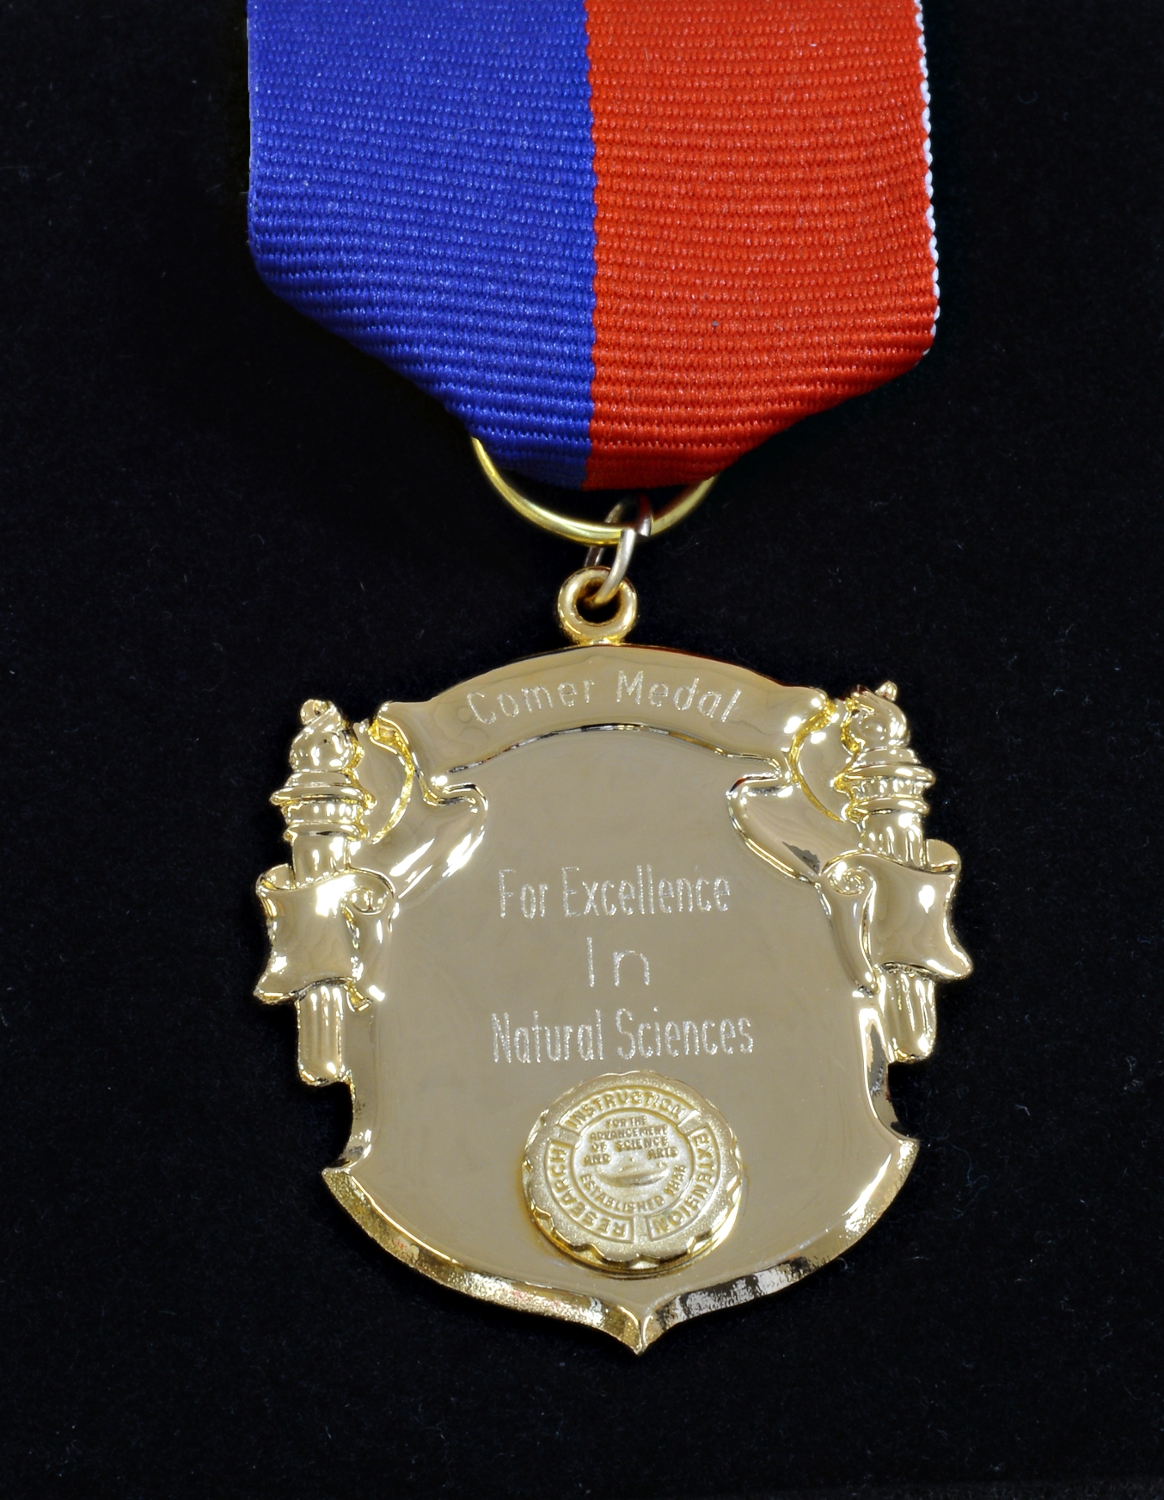 Comer Medal for Excellence in Natural Sciences